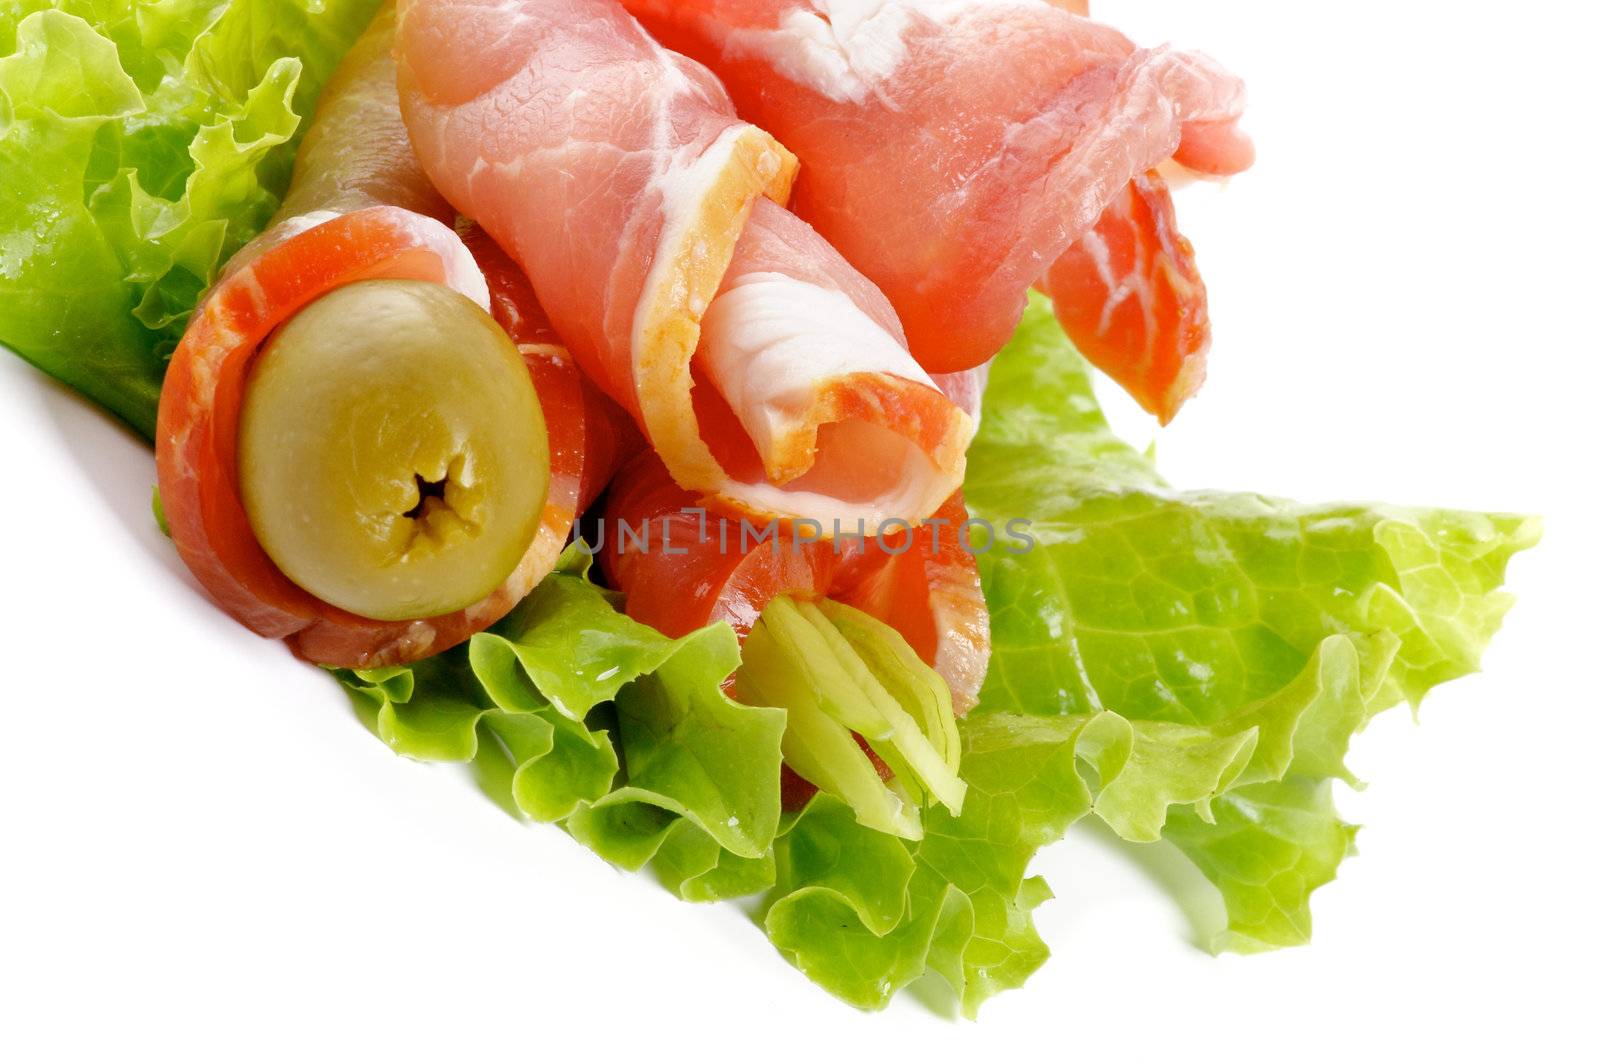 Snack of bacon with green olive and leaf lettuce isolated on white background